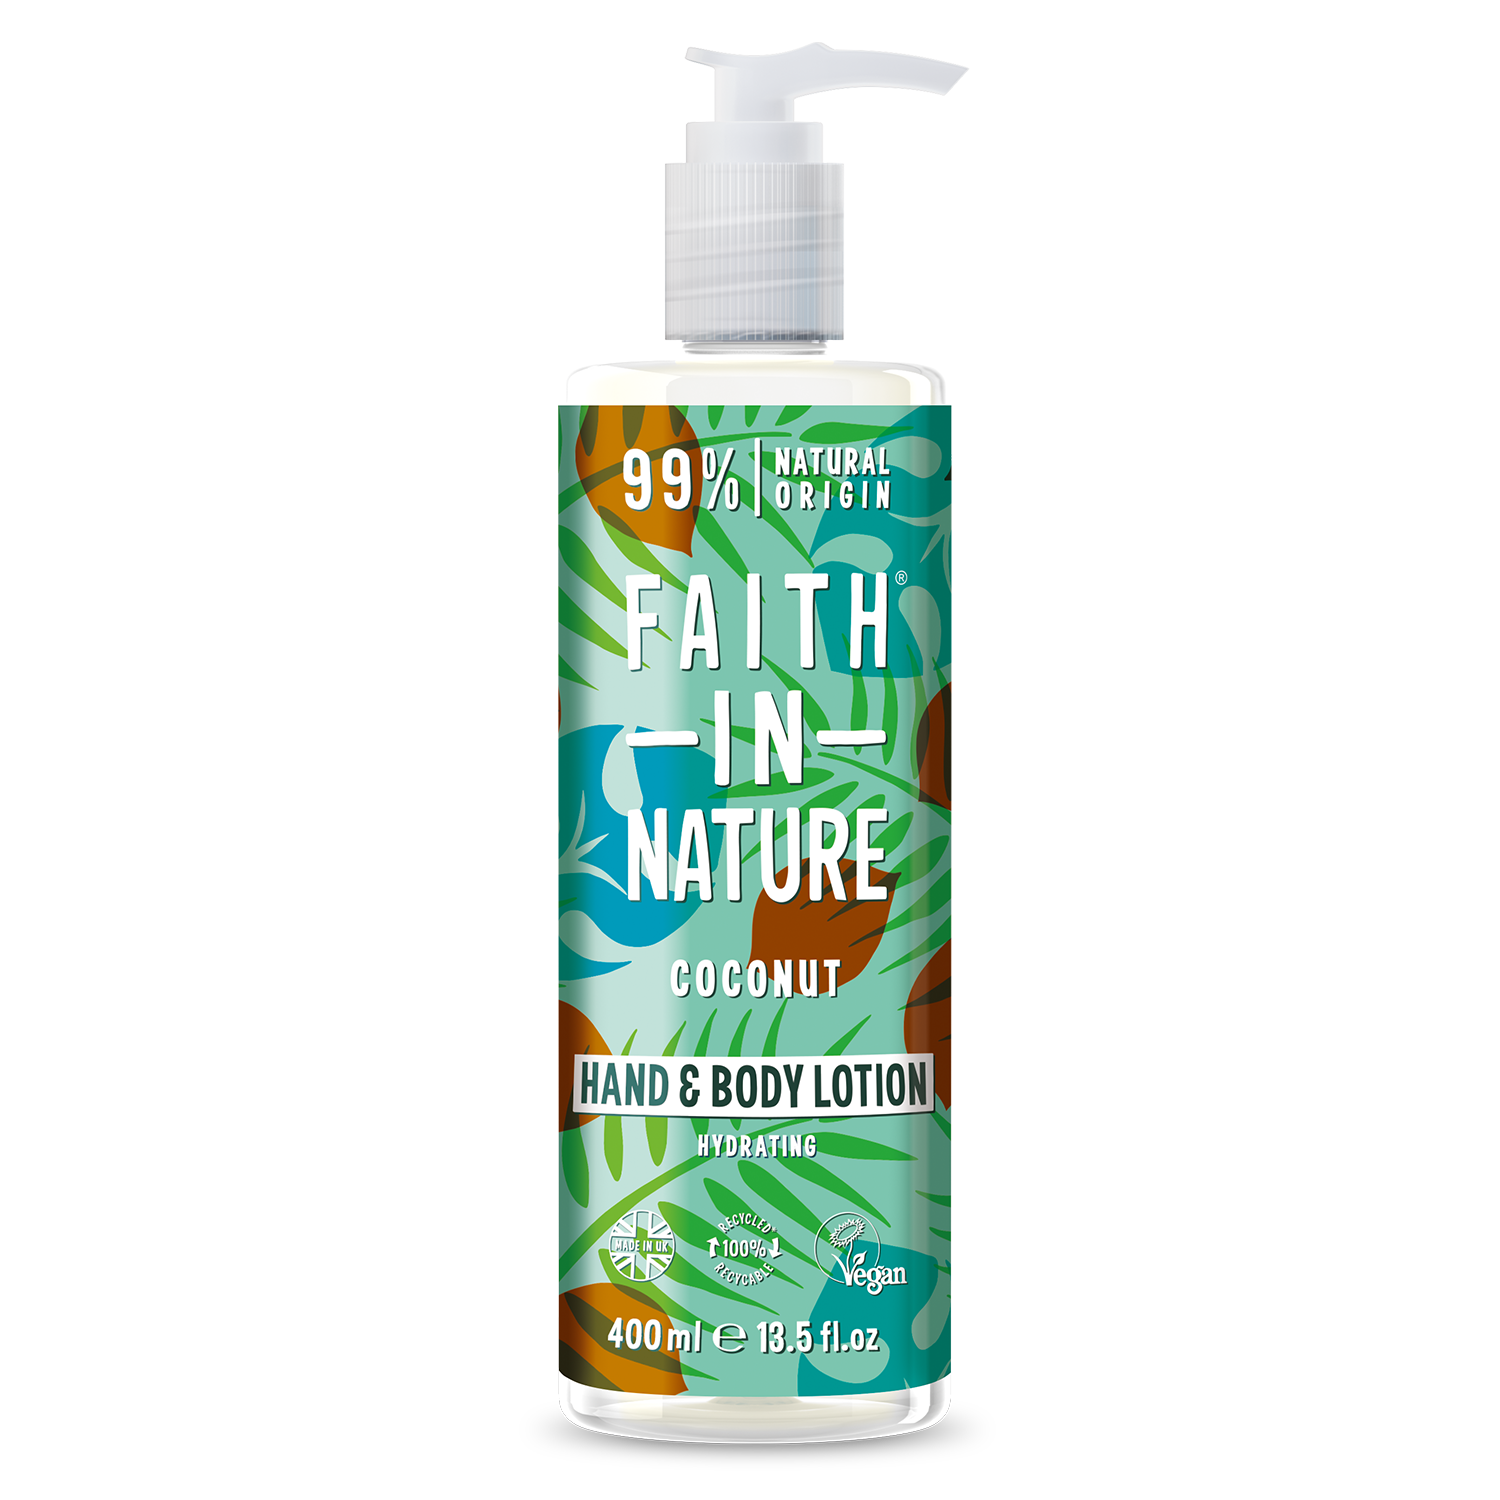 Faith in Nature Hand & Body Lotion Coconut     400 ml